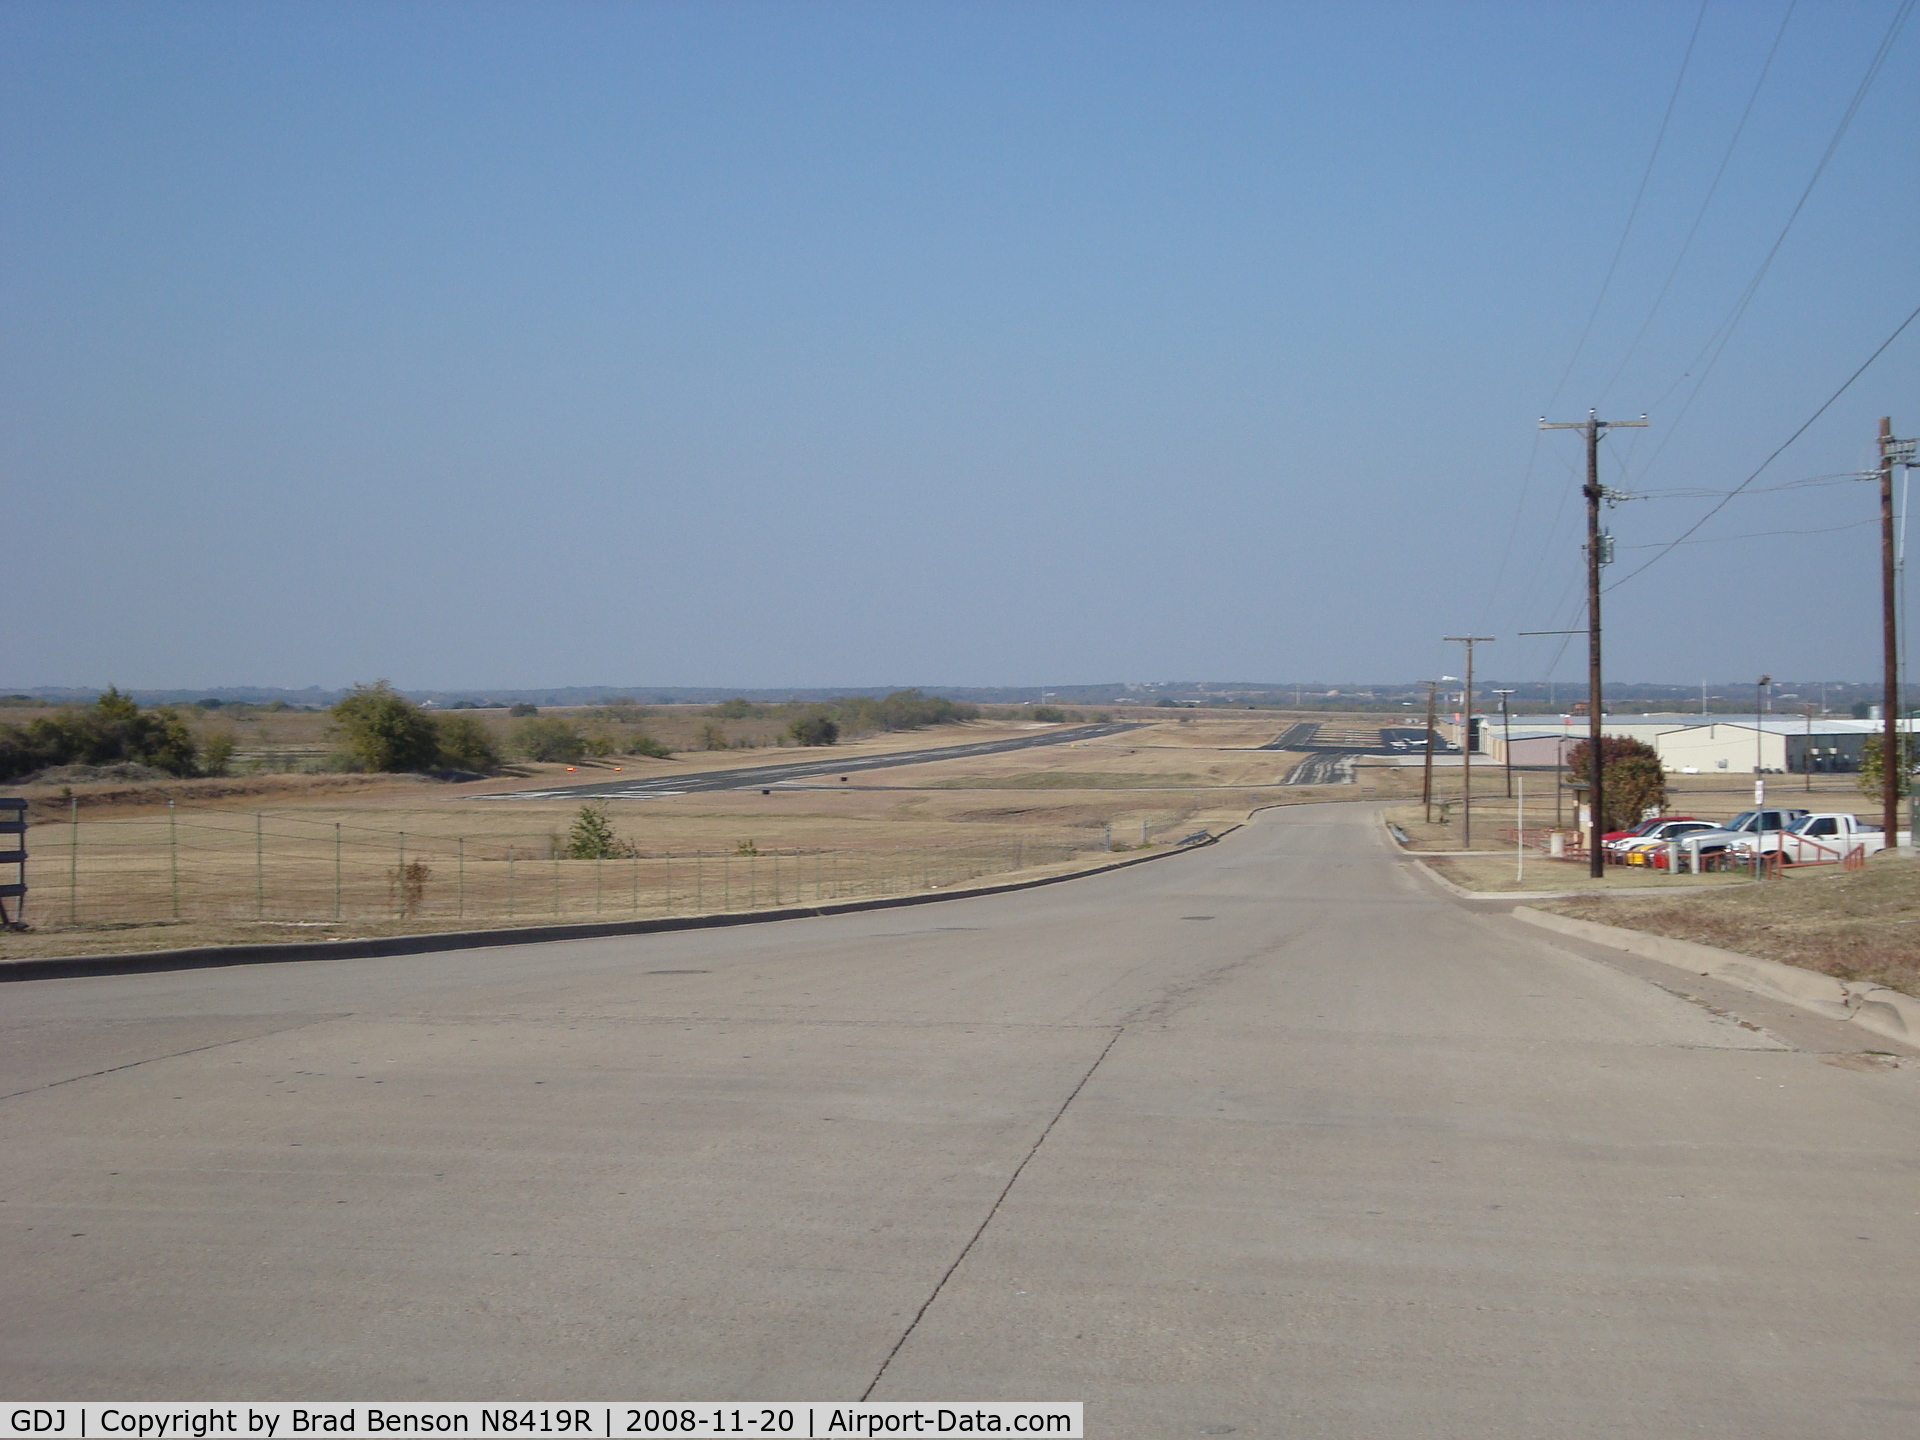 Granbury Regional Airport (GDJ) - Looking up Runway 32 from Howard Clemmons Rd on the South Side.